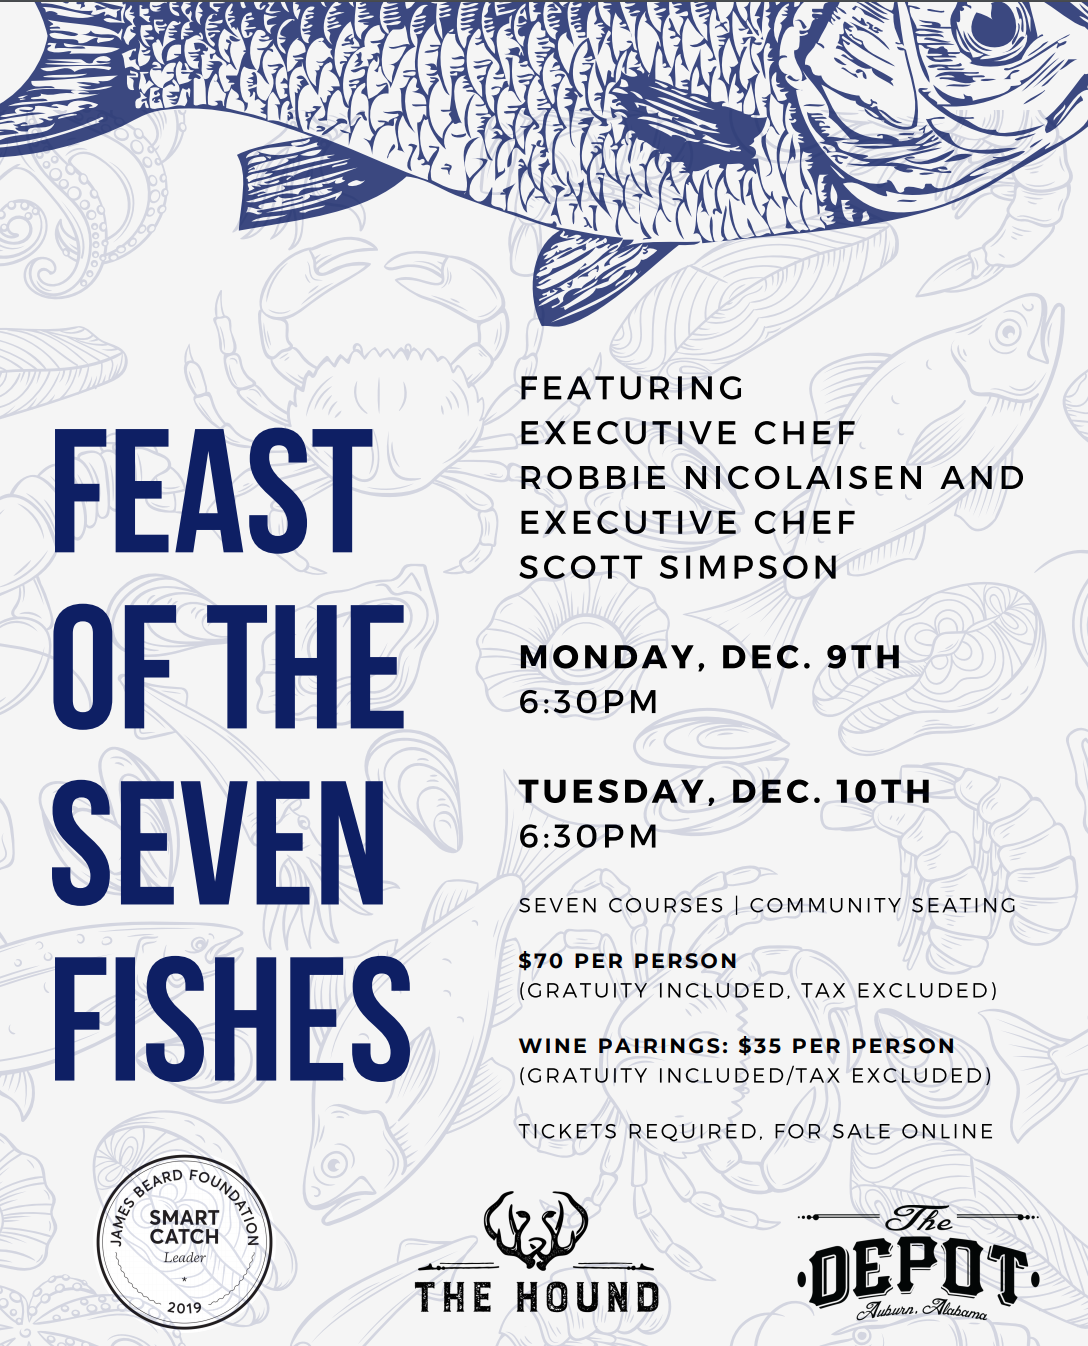 Feast of the Seven Fishes by Daniel Paterna